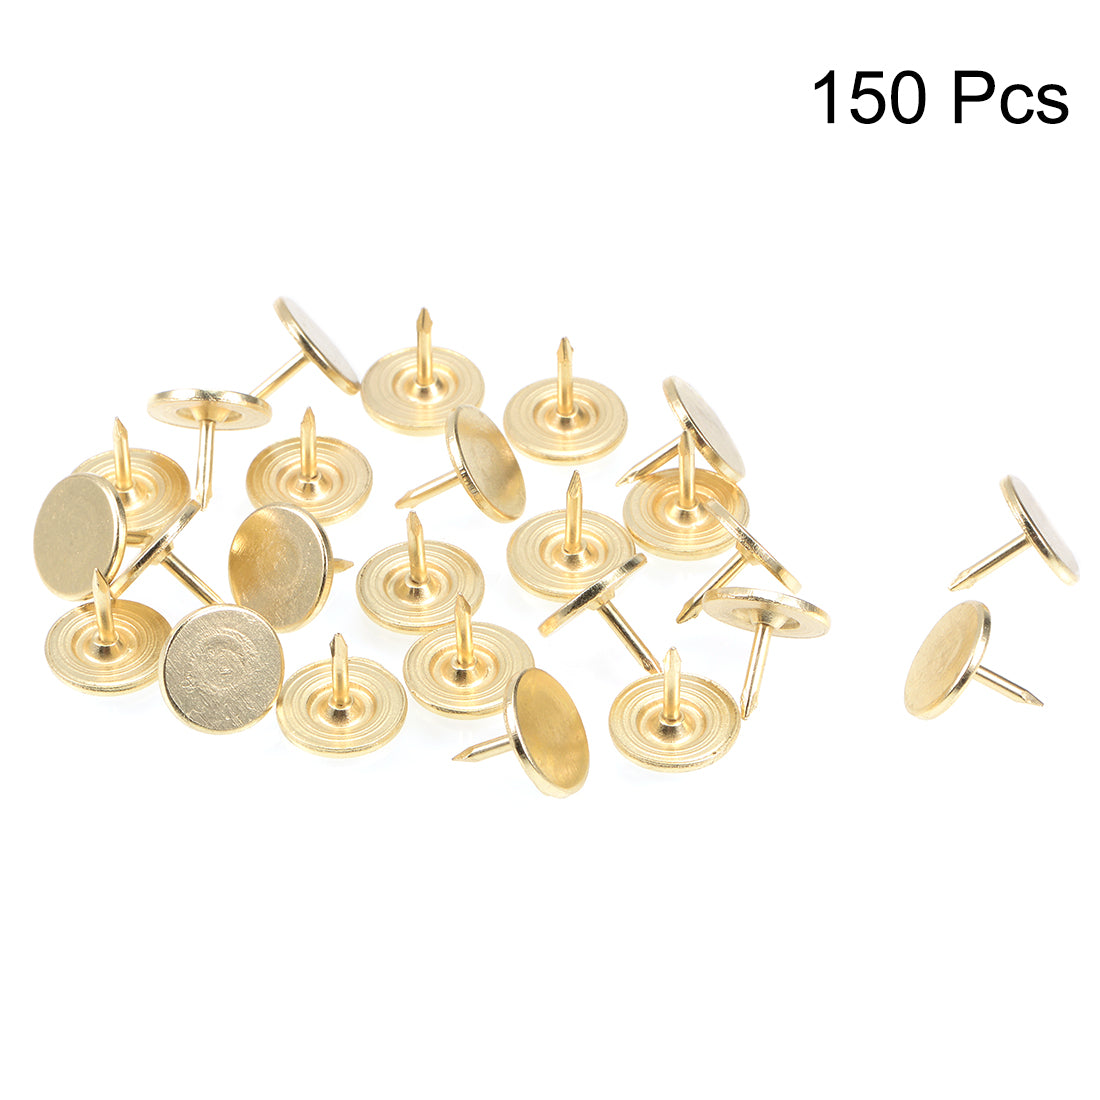 uxcell Uxcell Upholstery Nails Tacks 11mmx10mm Flat Head Furniture Nails Gold Tone 150 Pcs